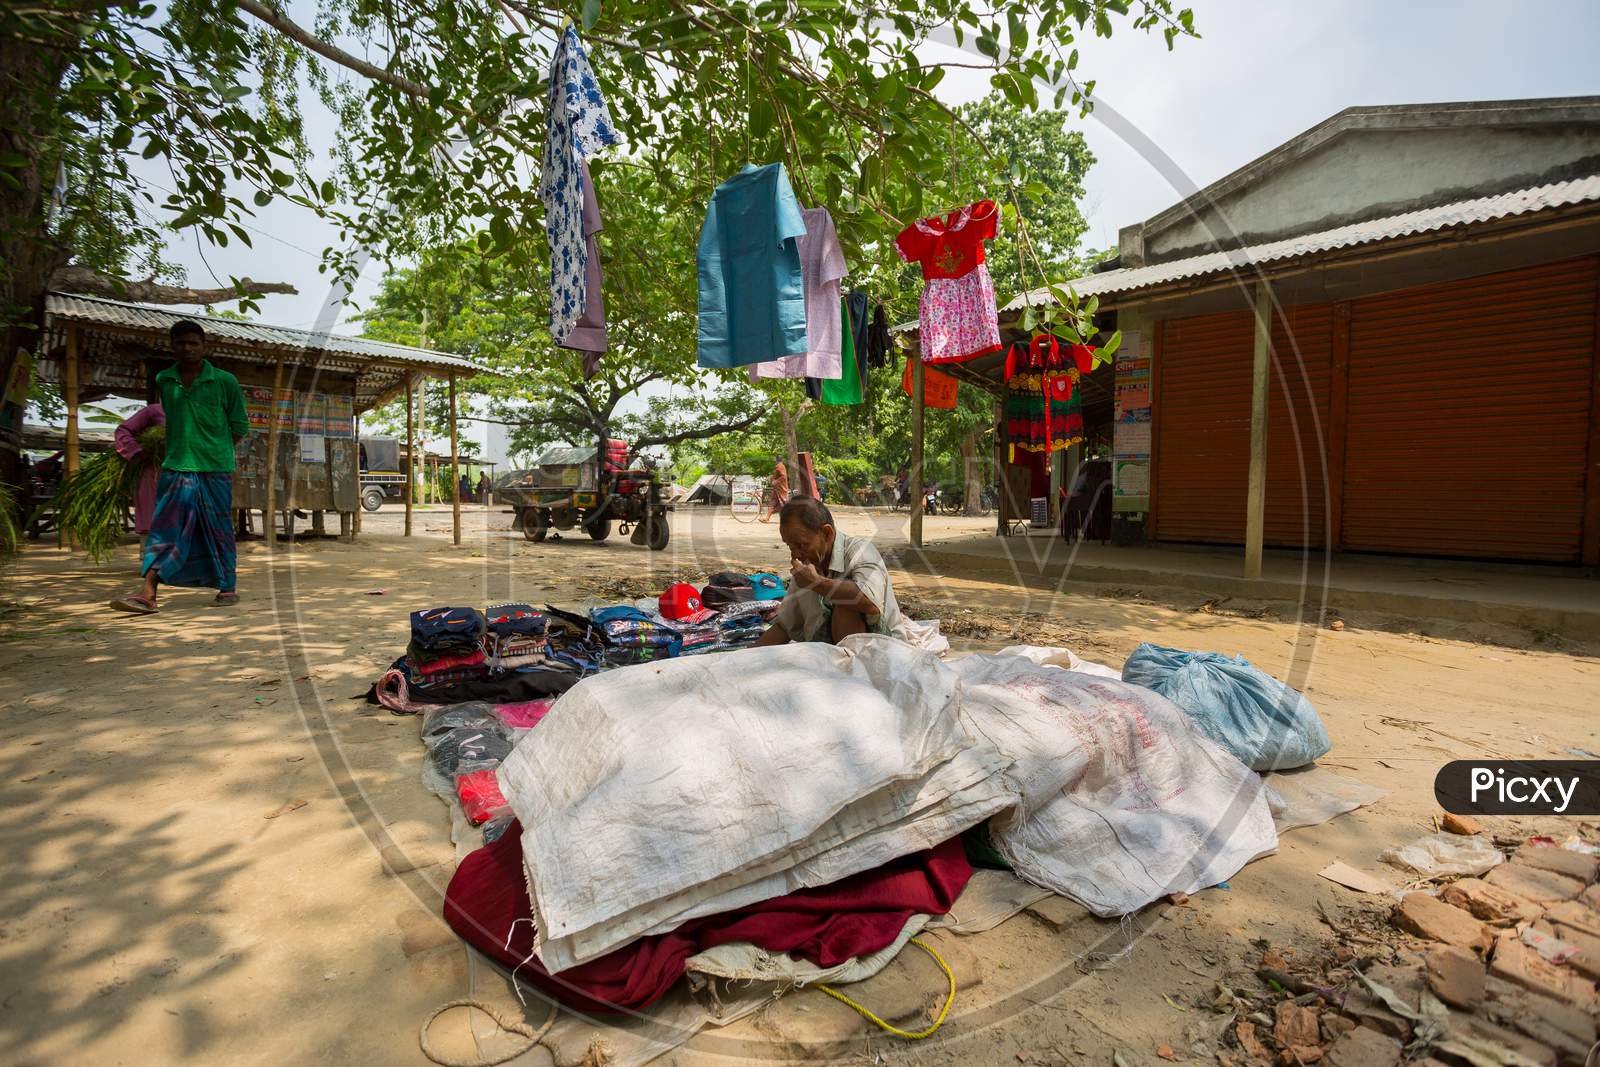 Bangladesh - May 19, 2019: A Rural Village Businessman Selling Cloth And Products To Hang Up On The Tree Trunk, Meherpur, Bangladesh.